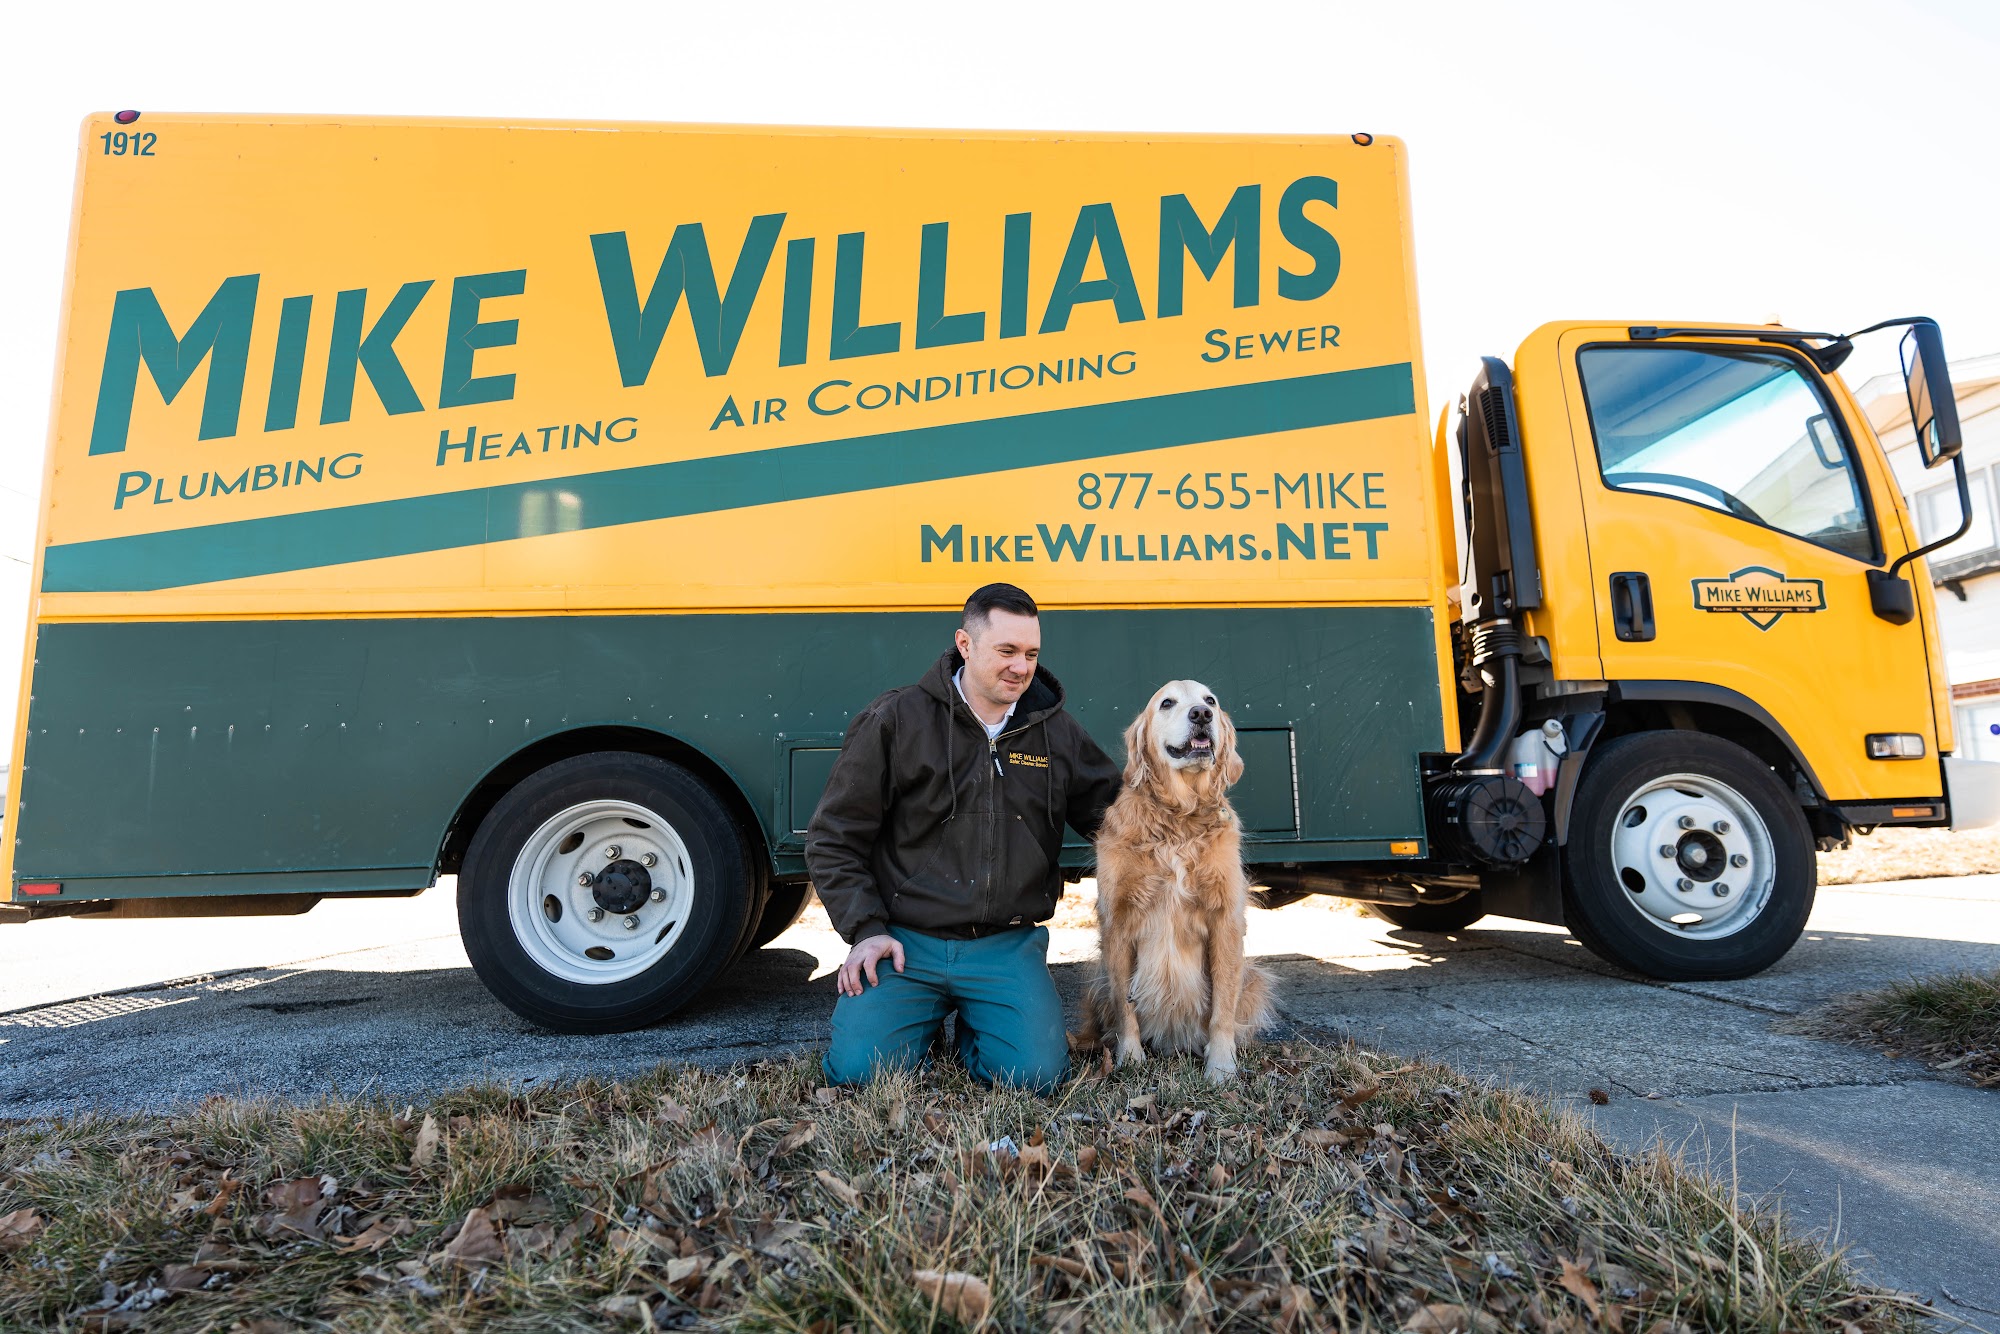 Mike Williams Plumbing, Heating, Air Conditioning & Sewer